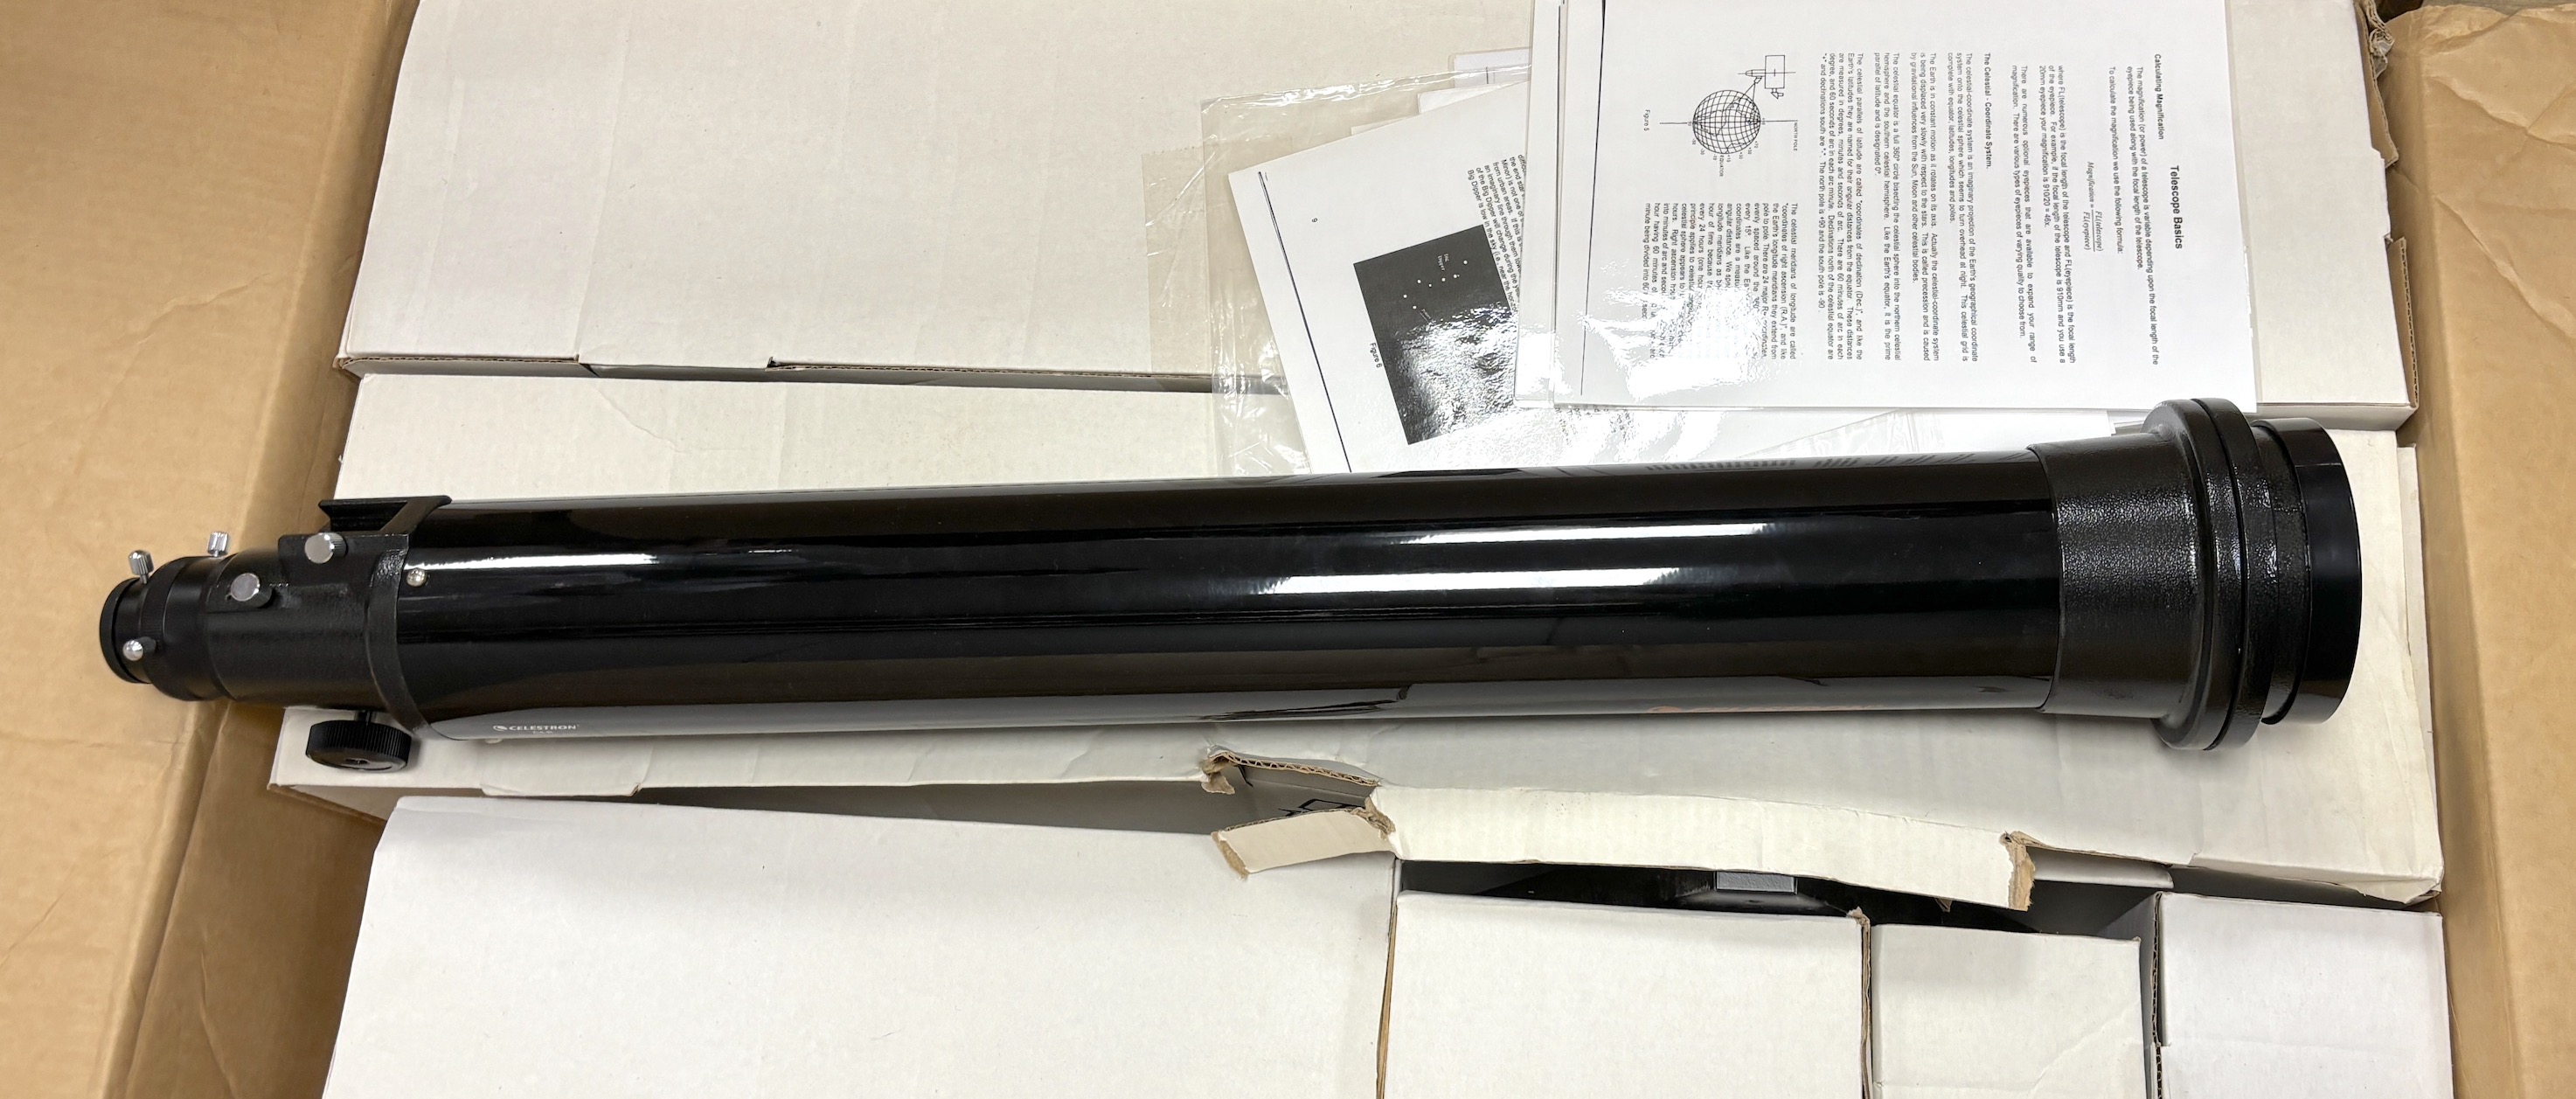 A Celestron C4-R refractor telescope, FL=1000mm F/10, in original box and packing compartments